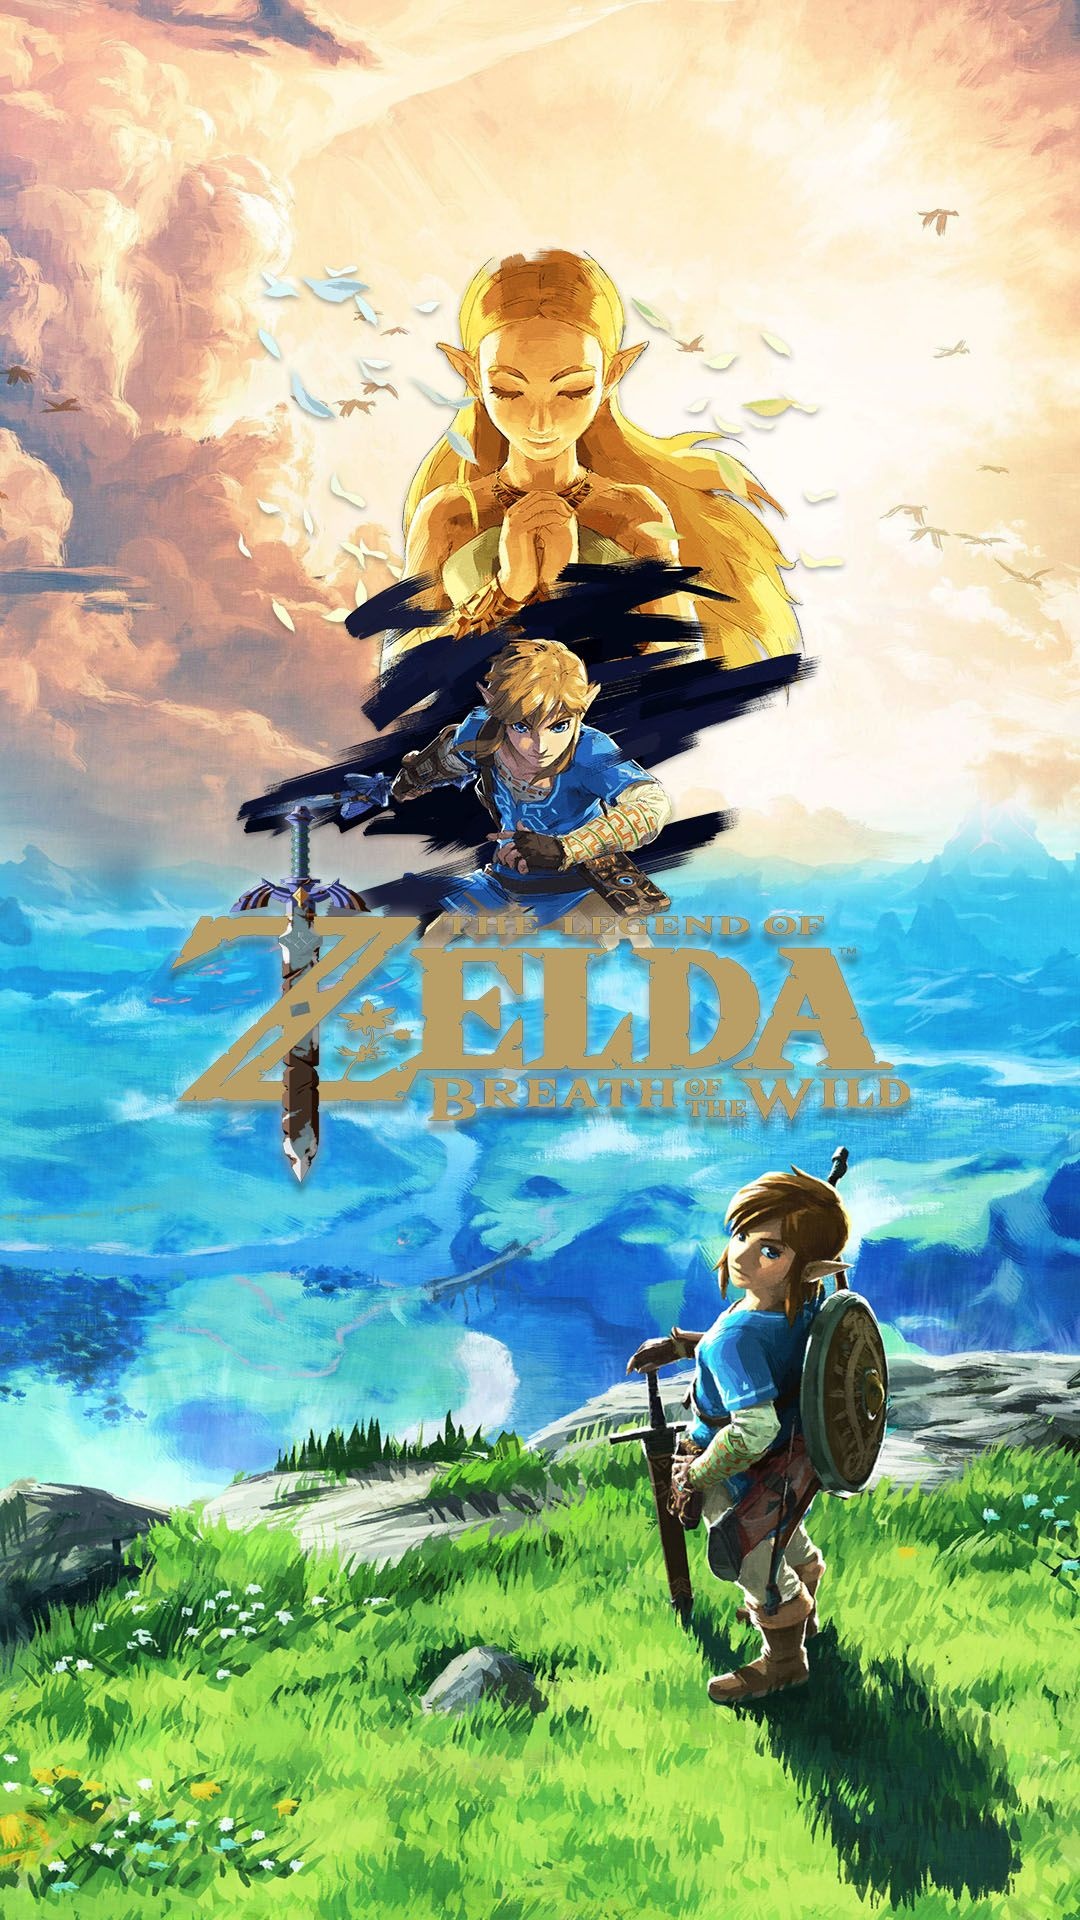 Phone wallpapers, Iconic Zelda, Mobile backgrounds, 1080x1920 Full HD Phone